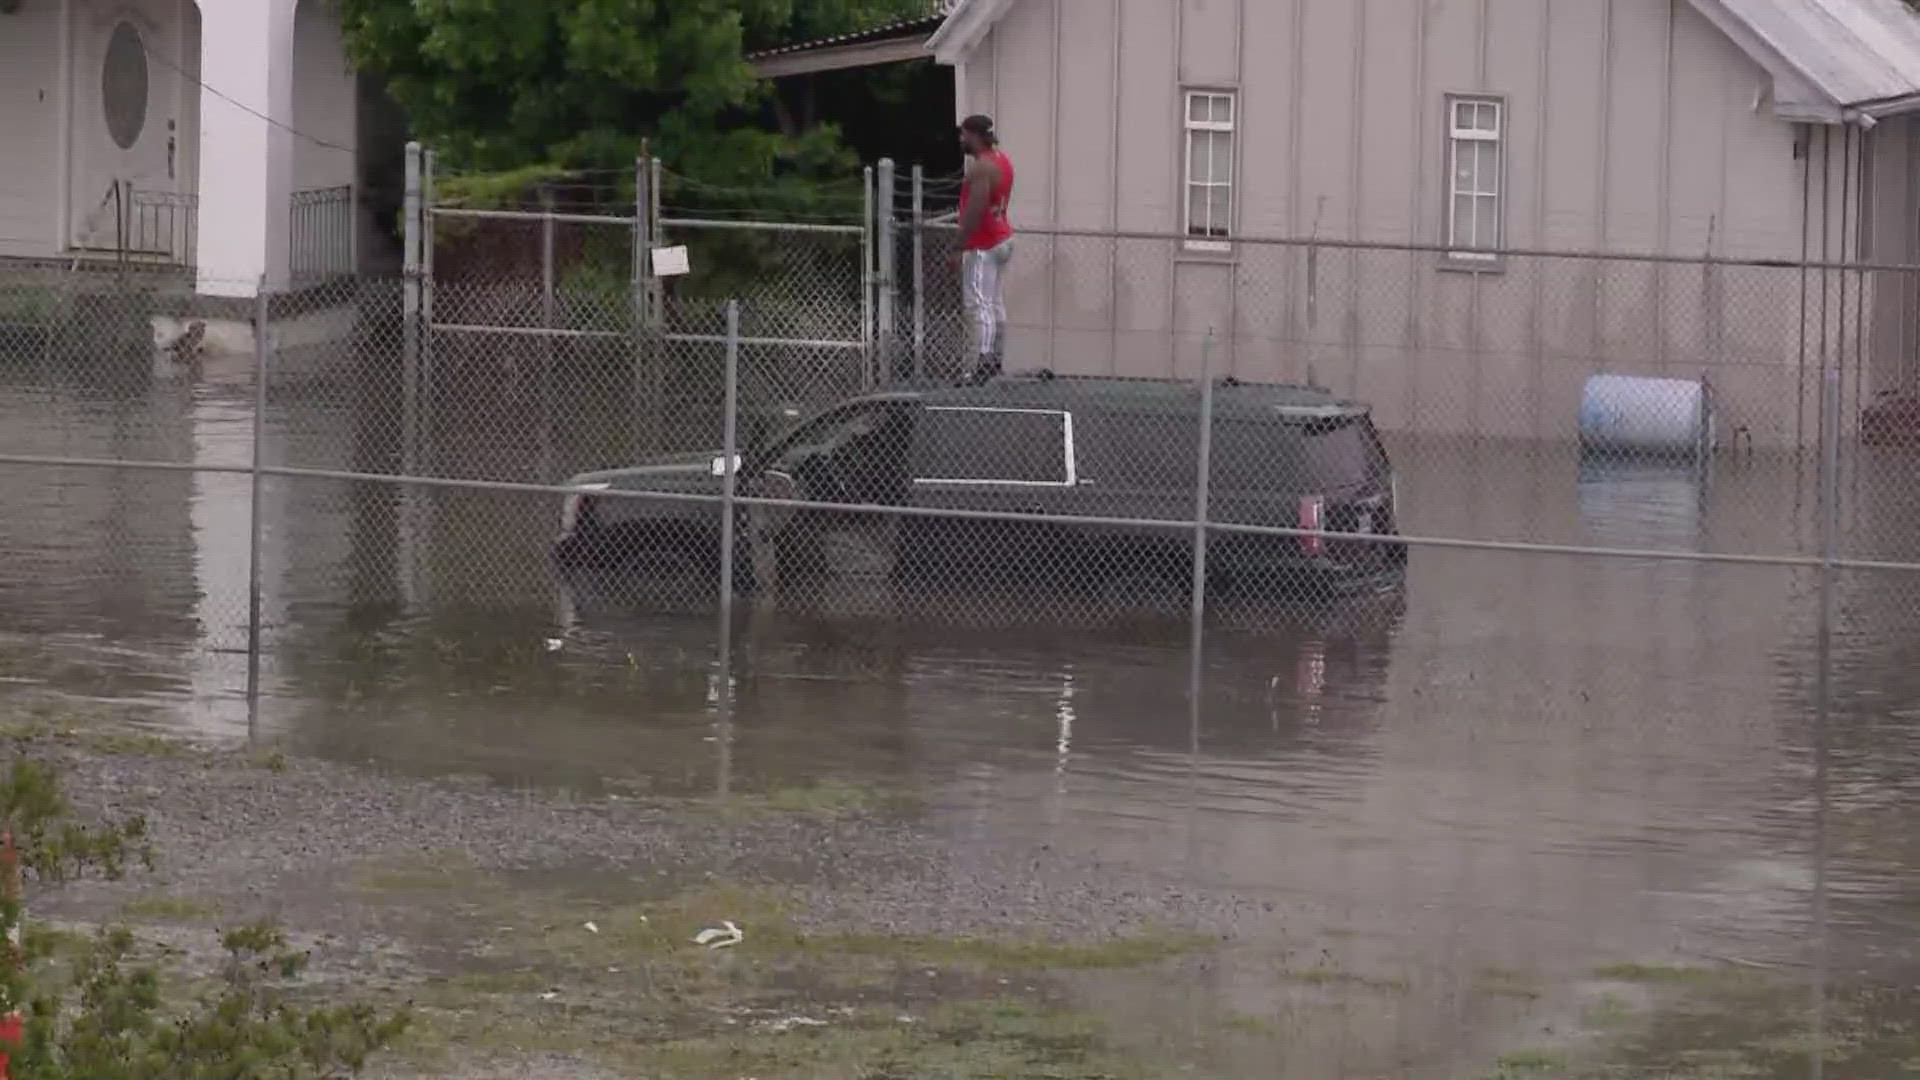 Around 4:30 p.m., a man in a tall SUV drove through really deep floodwaters. He ended up stalled, and standing on the roof of his car near Airline Drive.